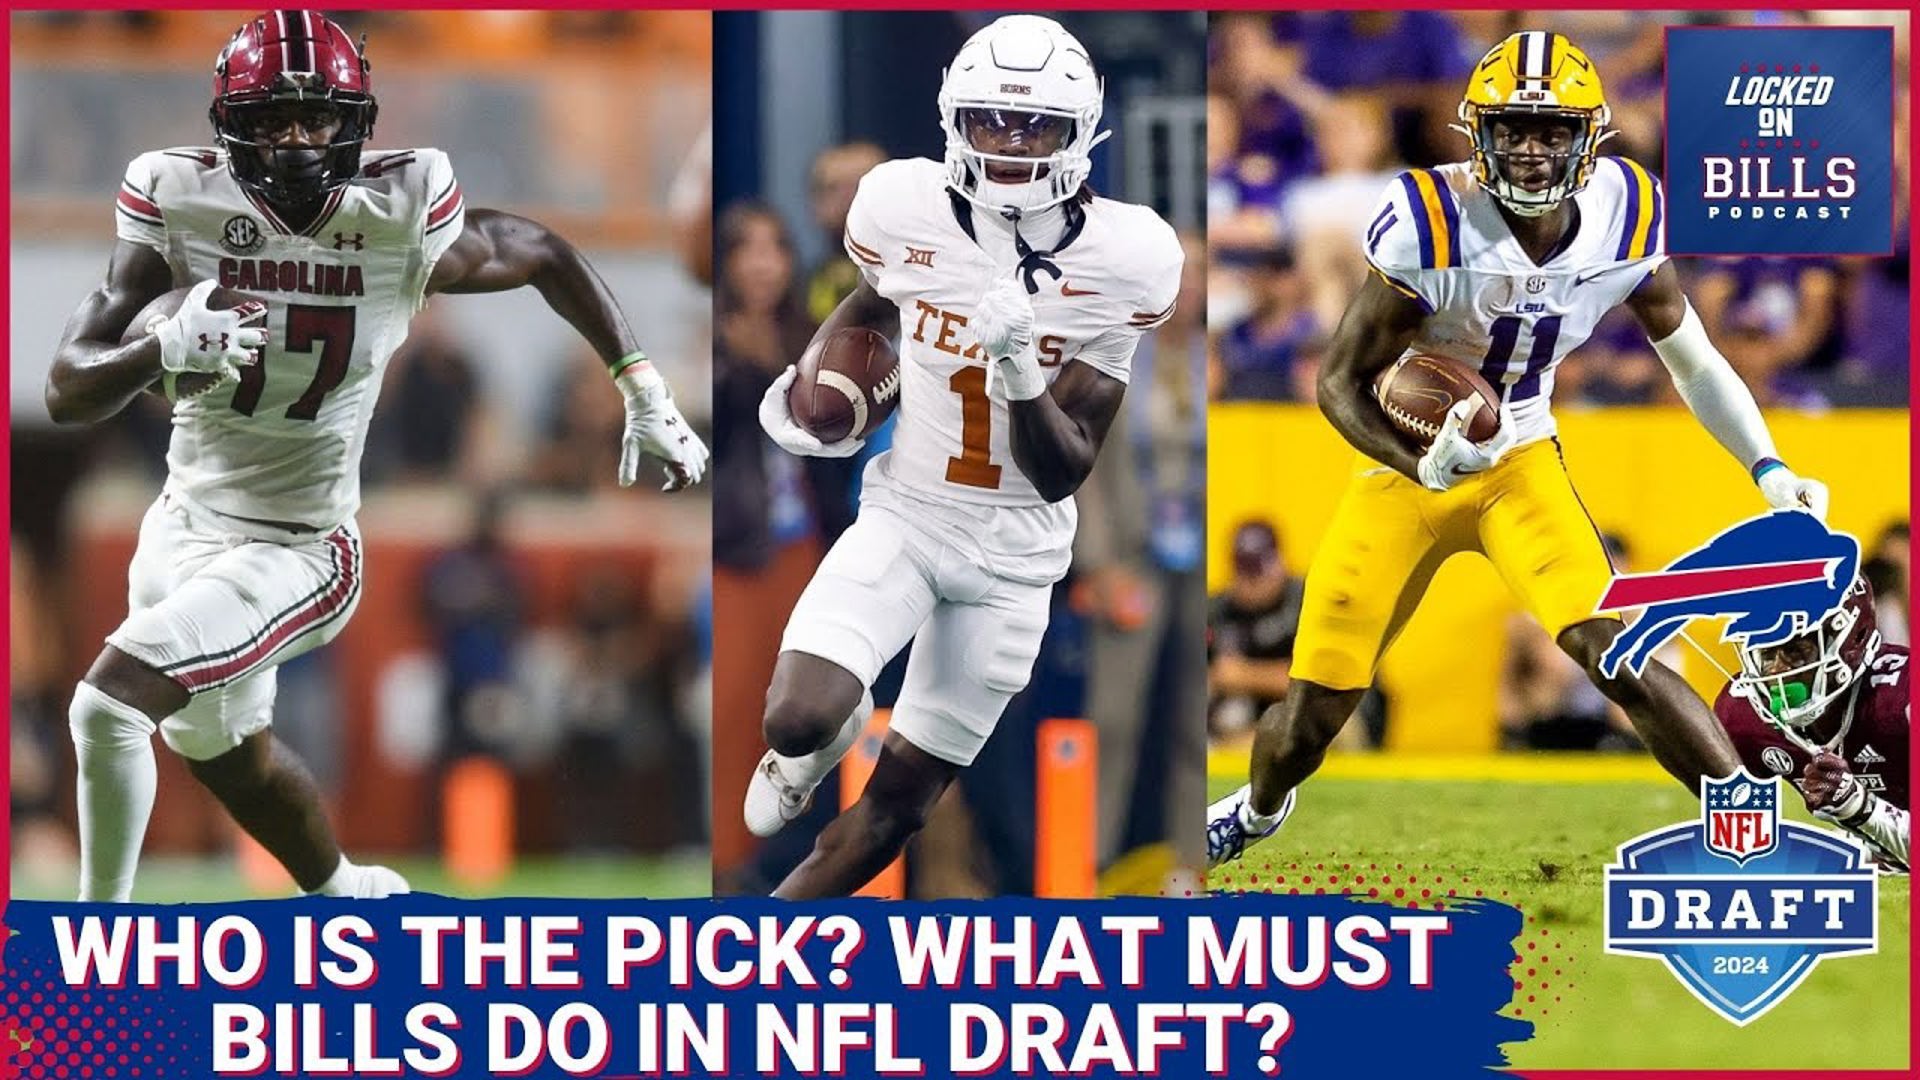 What will the Buffalo Bills do in the 1st round of the NFL Draft? Brandon Beane’s draft to-do list